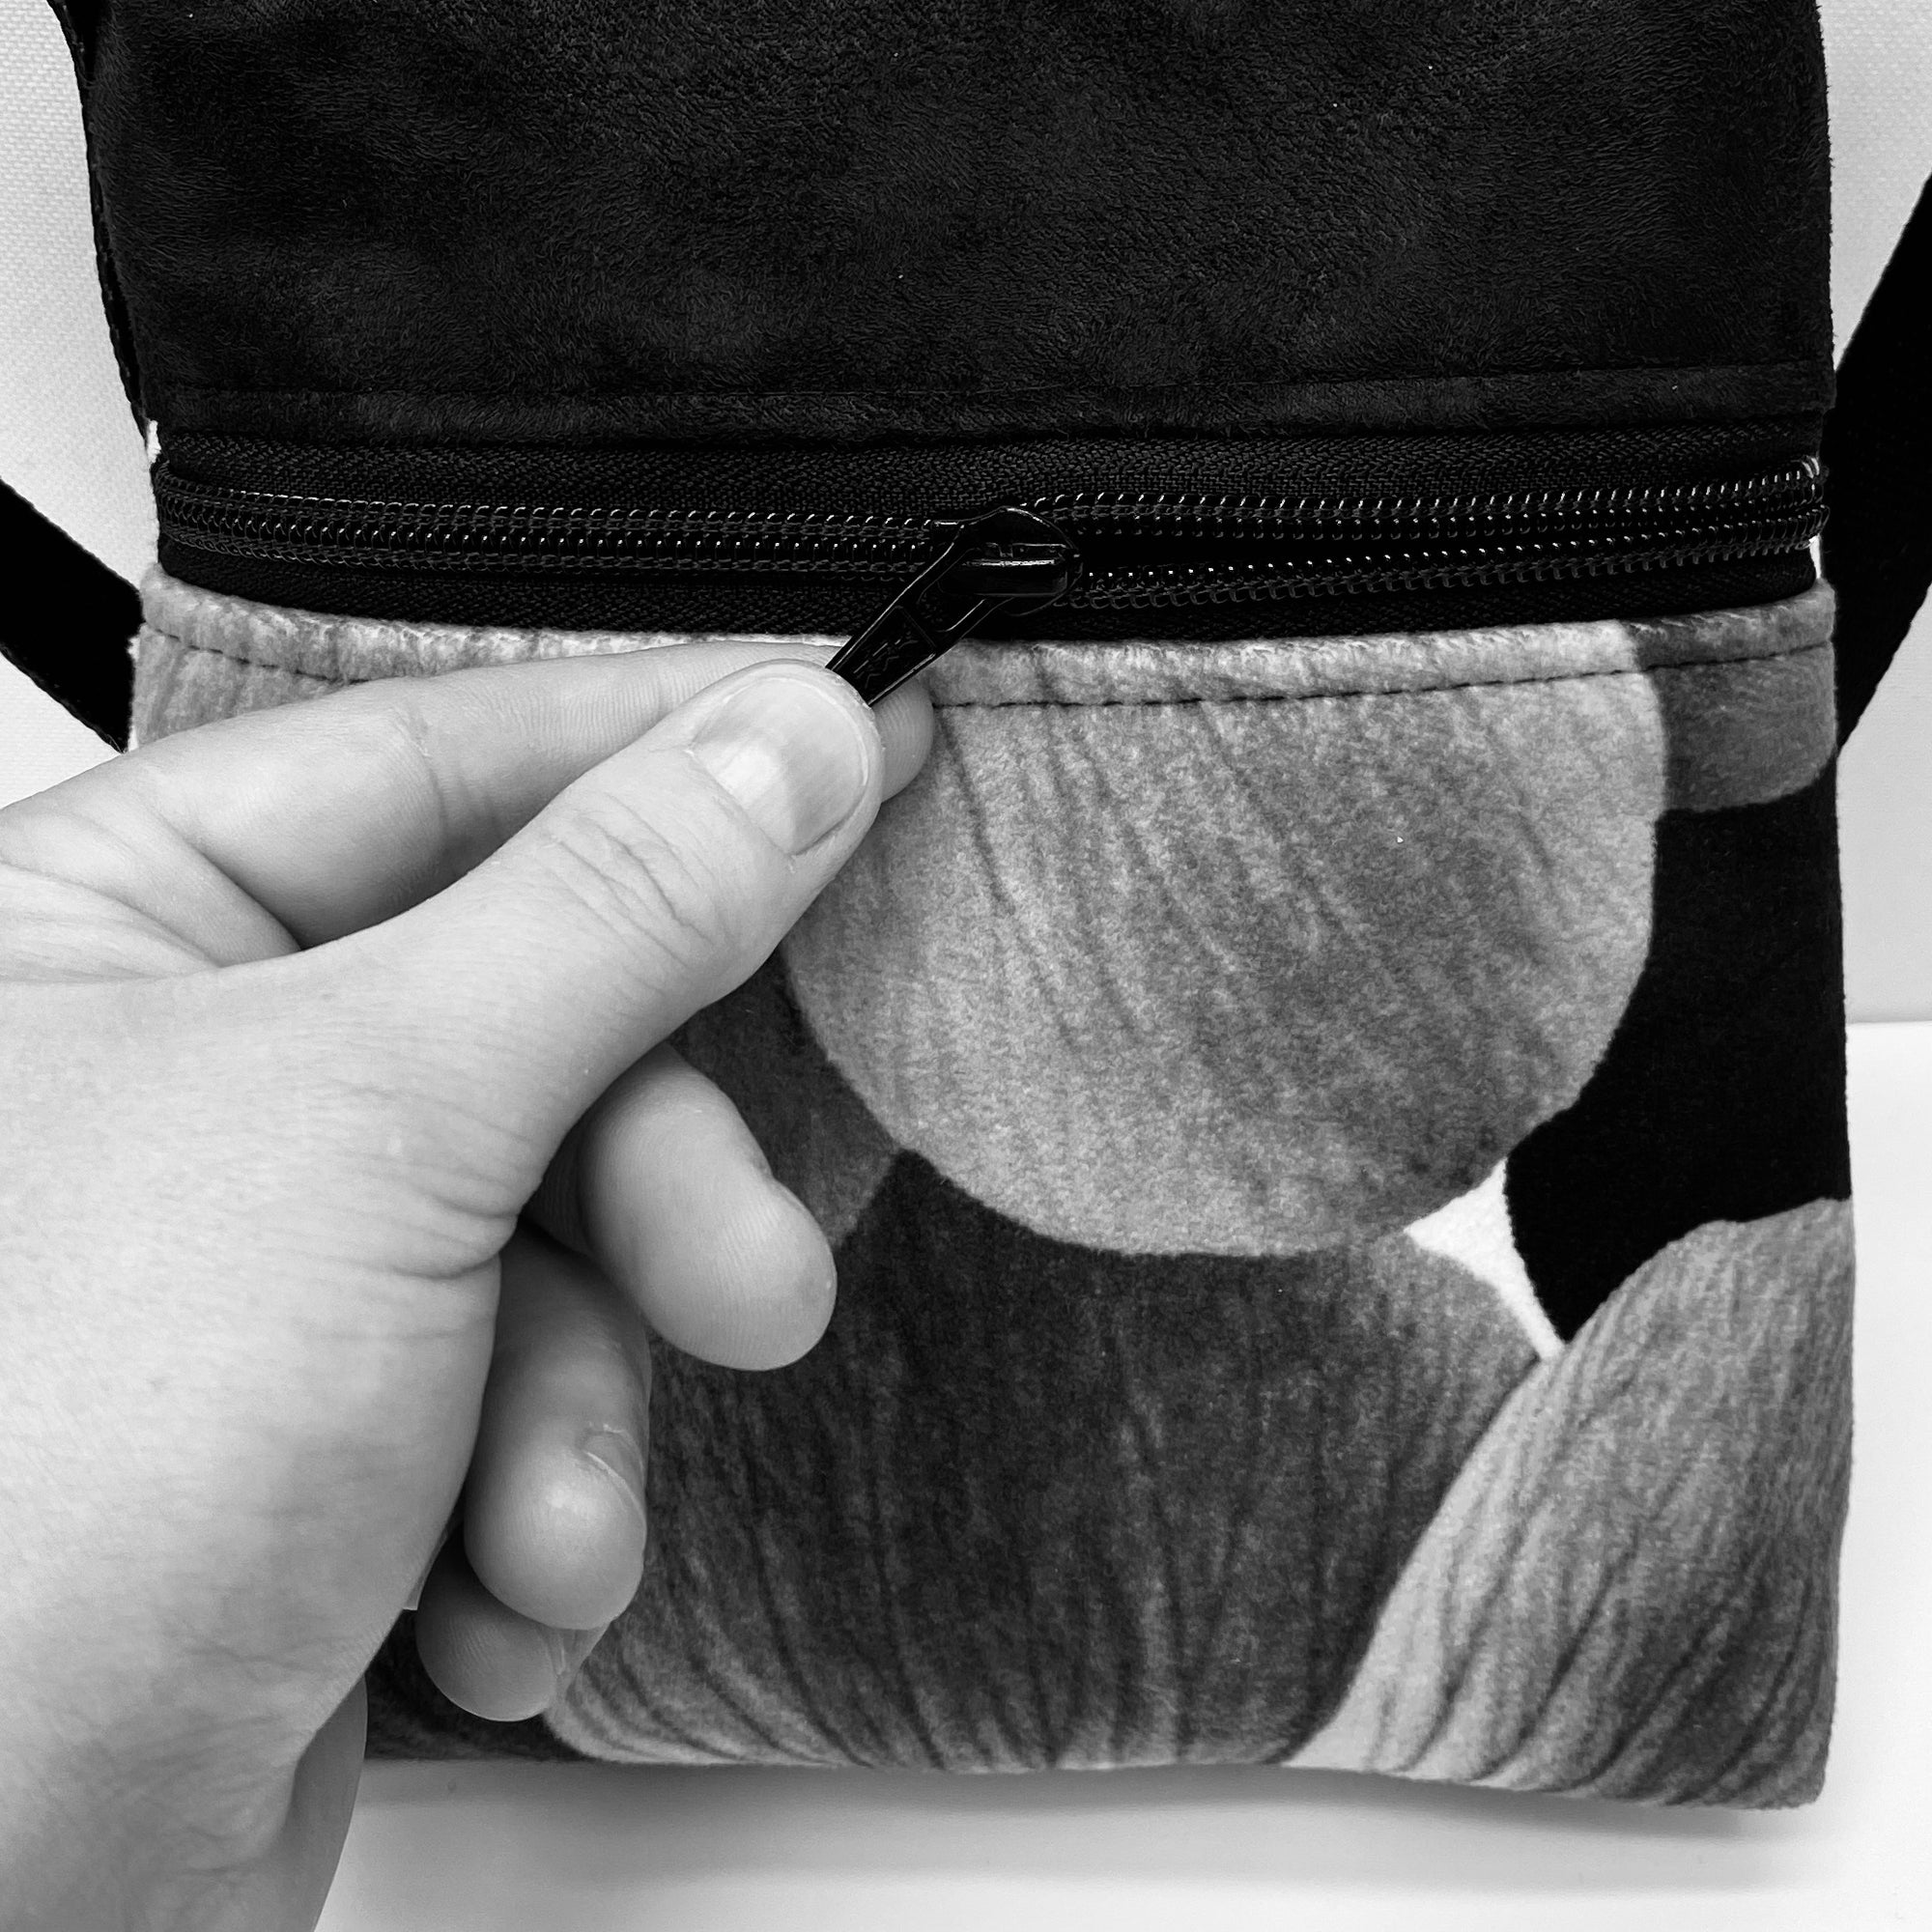 Add on OUTSIDE Zipper Pocket to the BACK of Bag